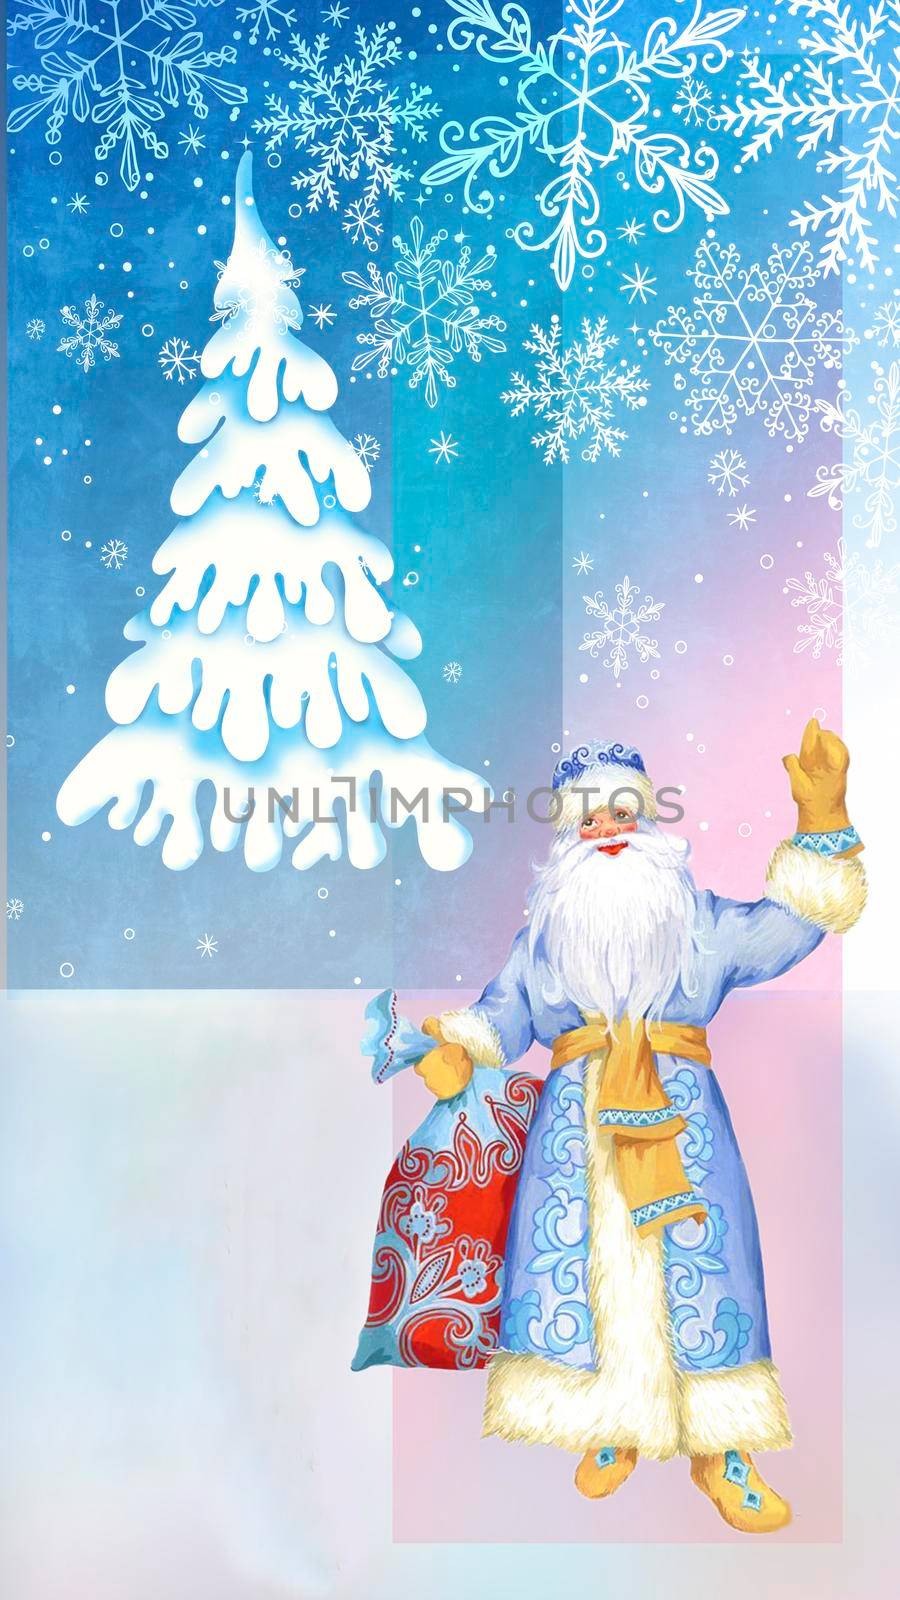 Christmas greeting card with the image of Santa Claus. by georgina198